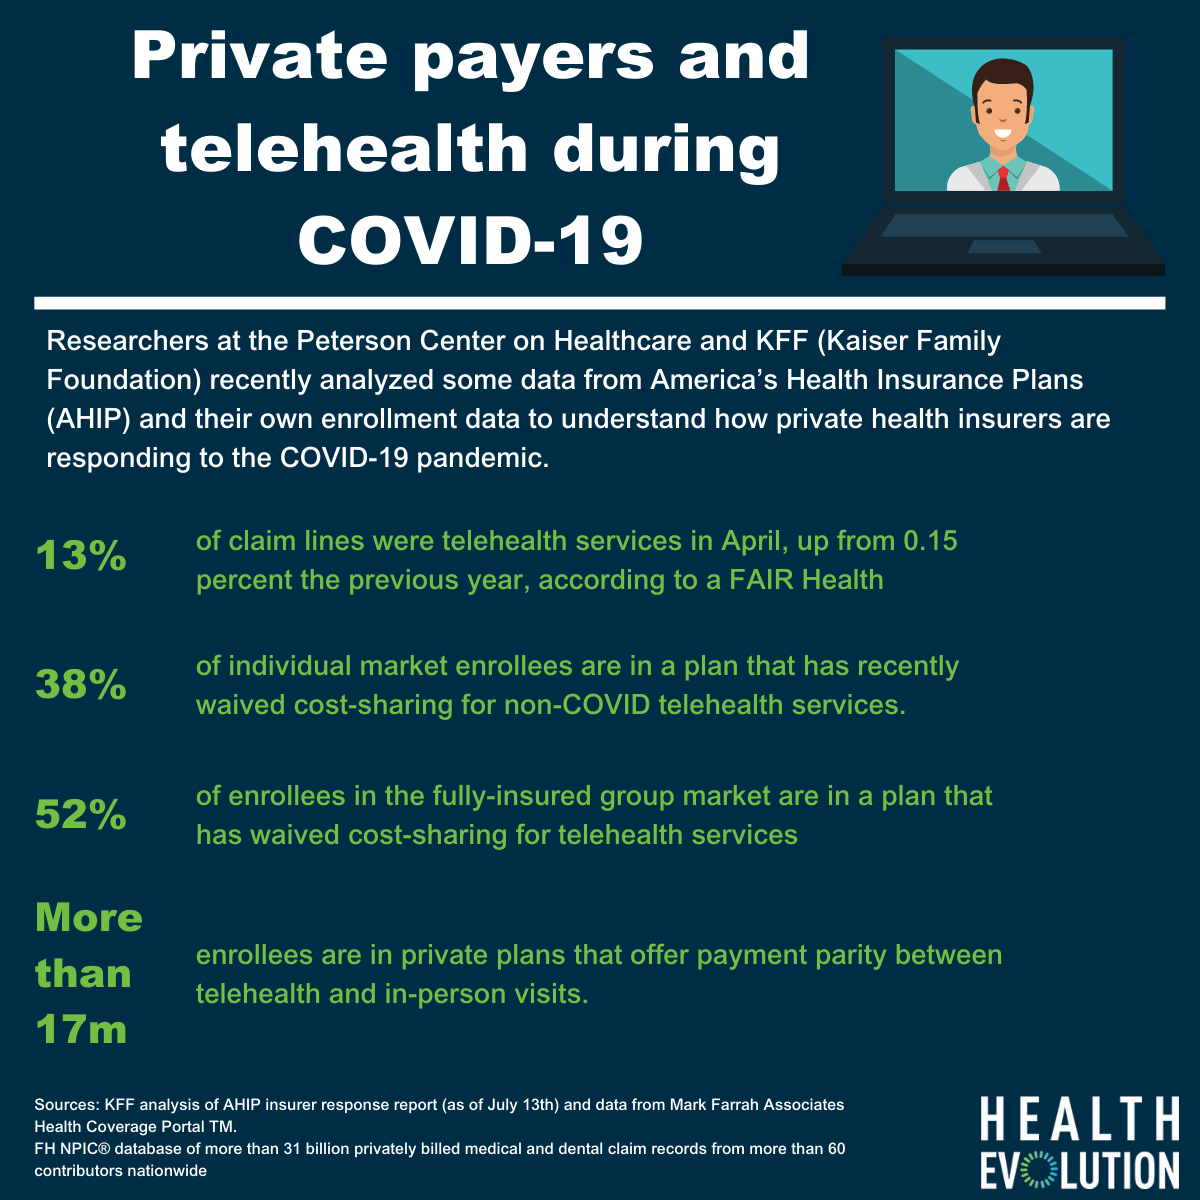 Data dive: Private health plan telehealth usage during COVID-19